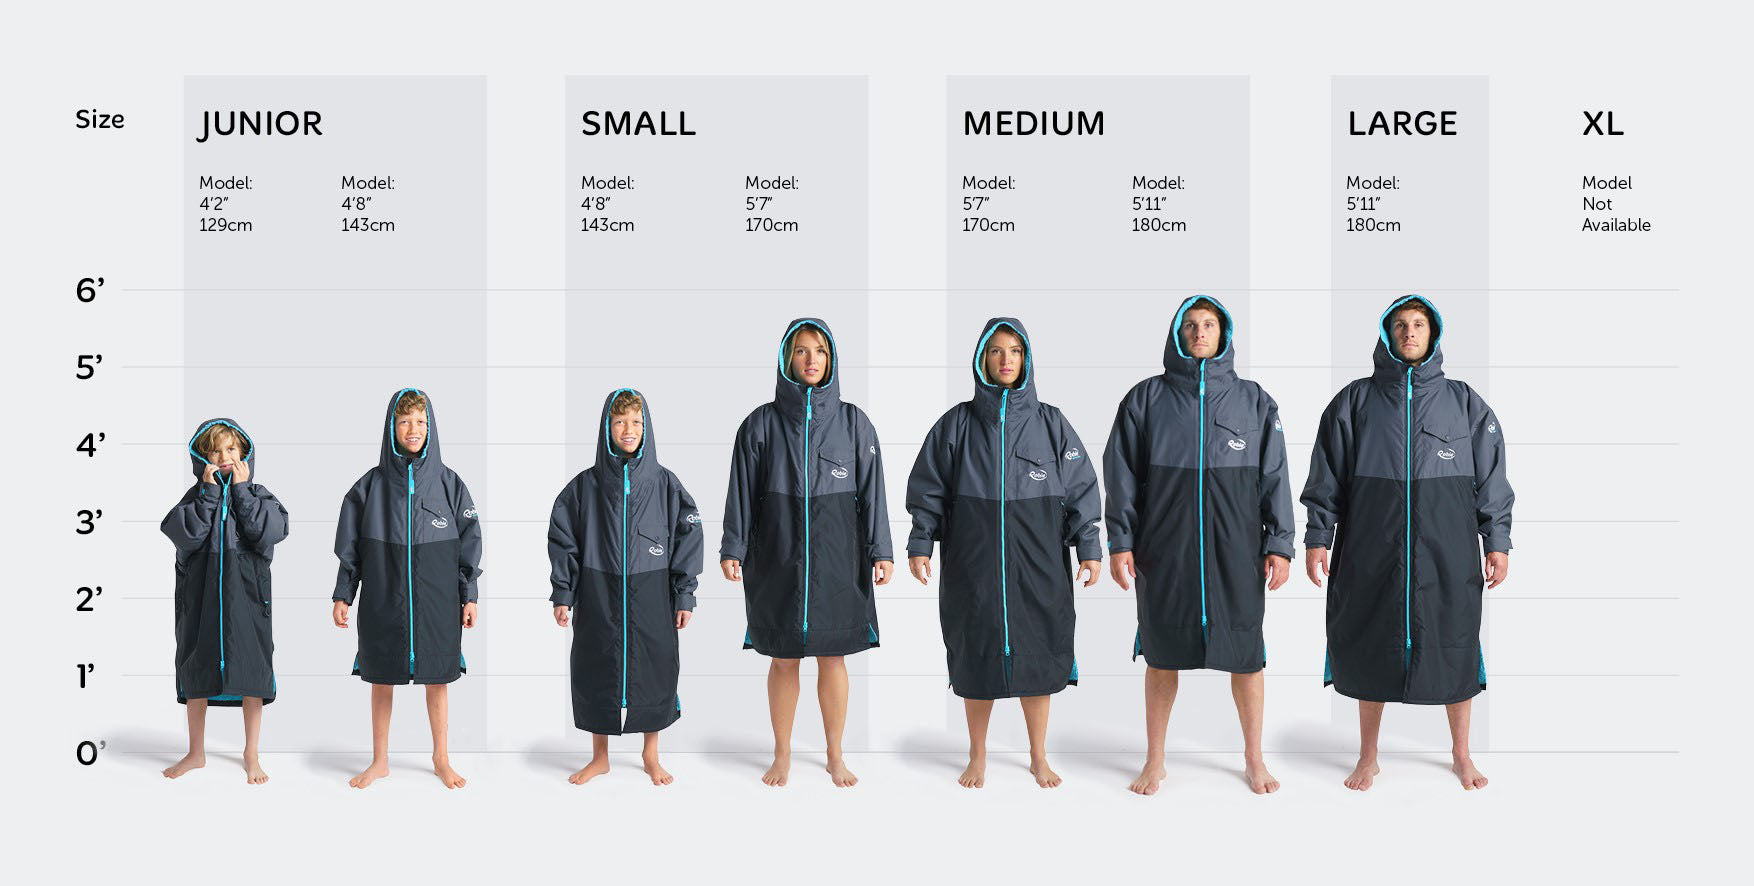 Robie Dry Series Long Sleeve Eco Change Robe Size Comparison Chart